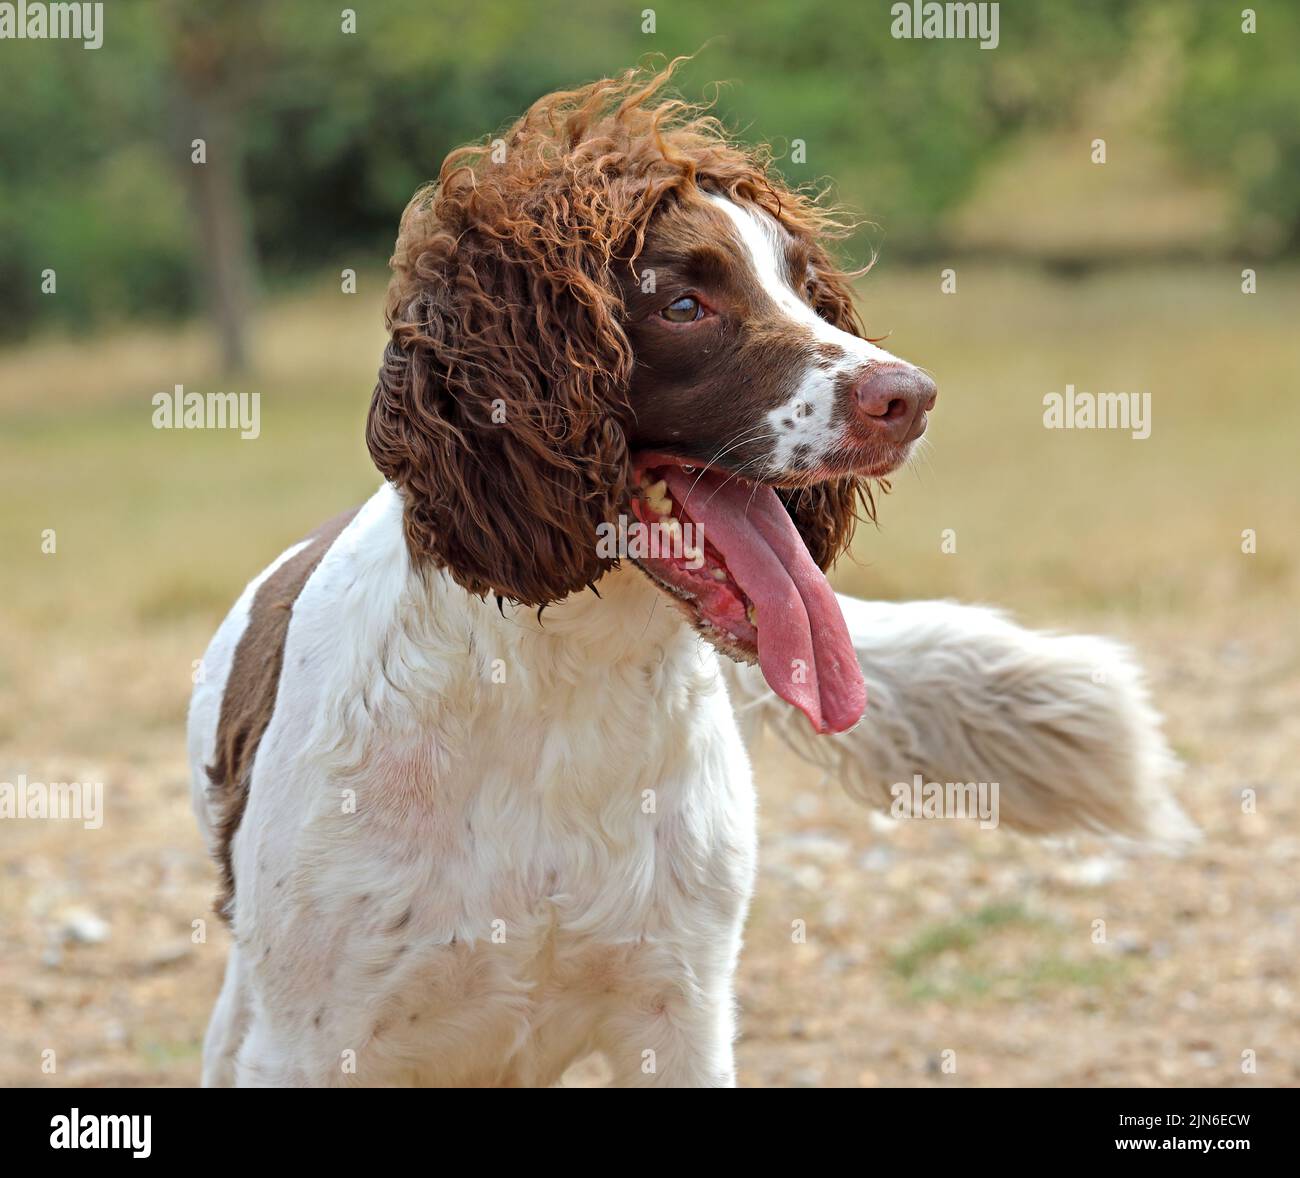 Playful energetic Springer Spaniel dog in a park, tempting for thieves Stock Photo